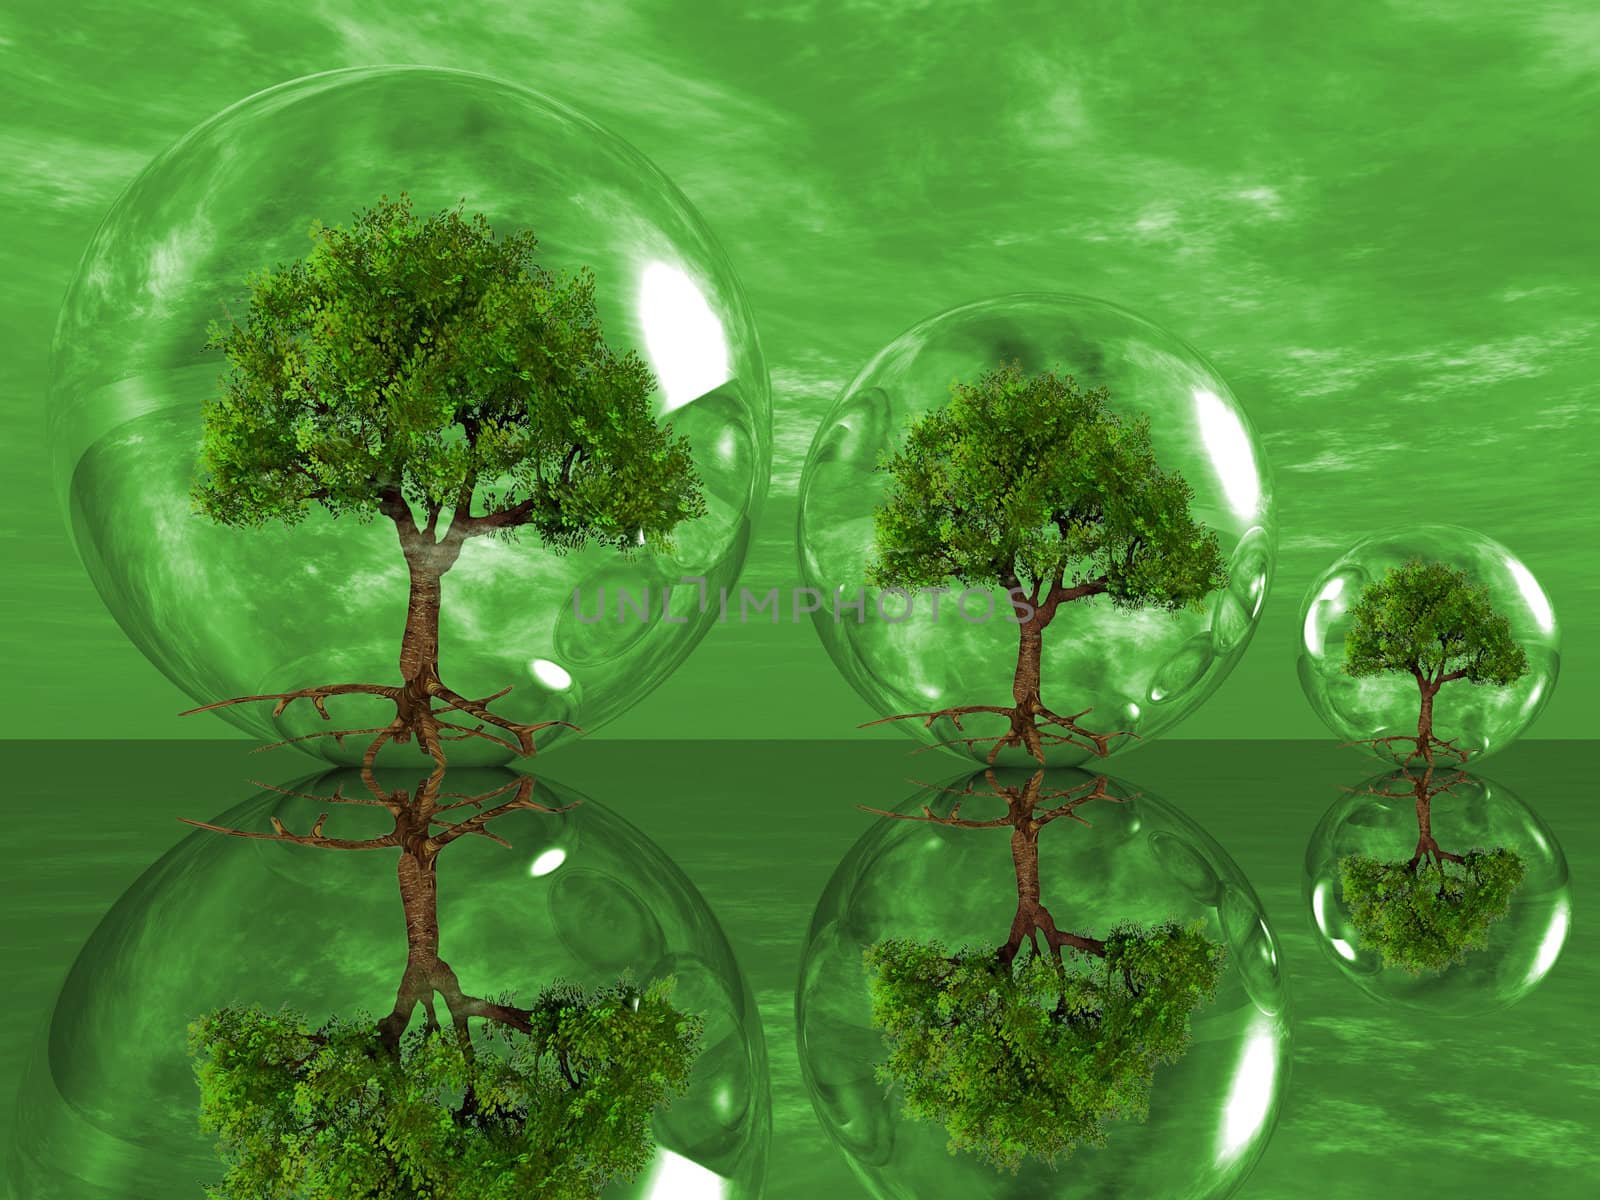 the green trees in bubbles